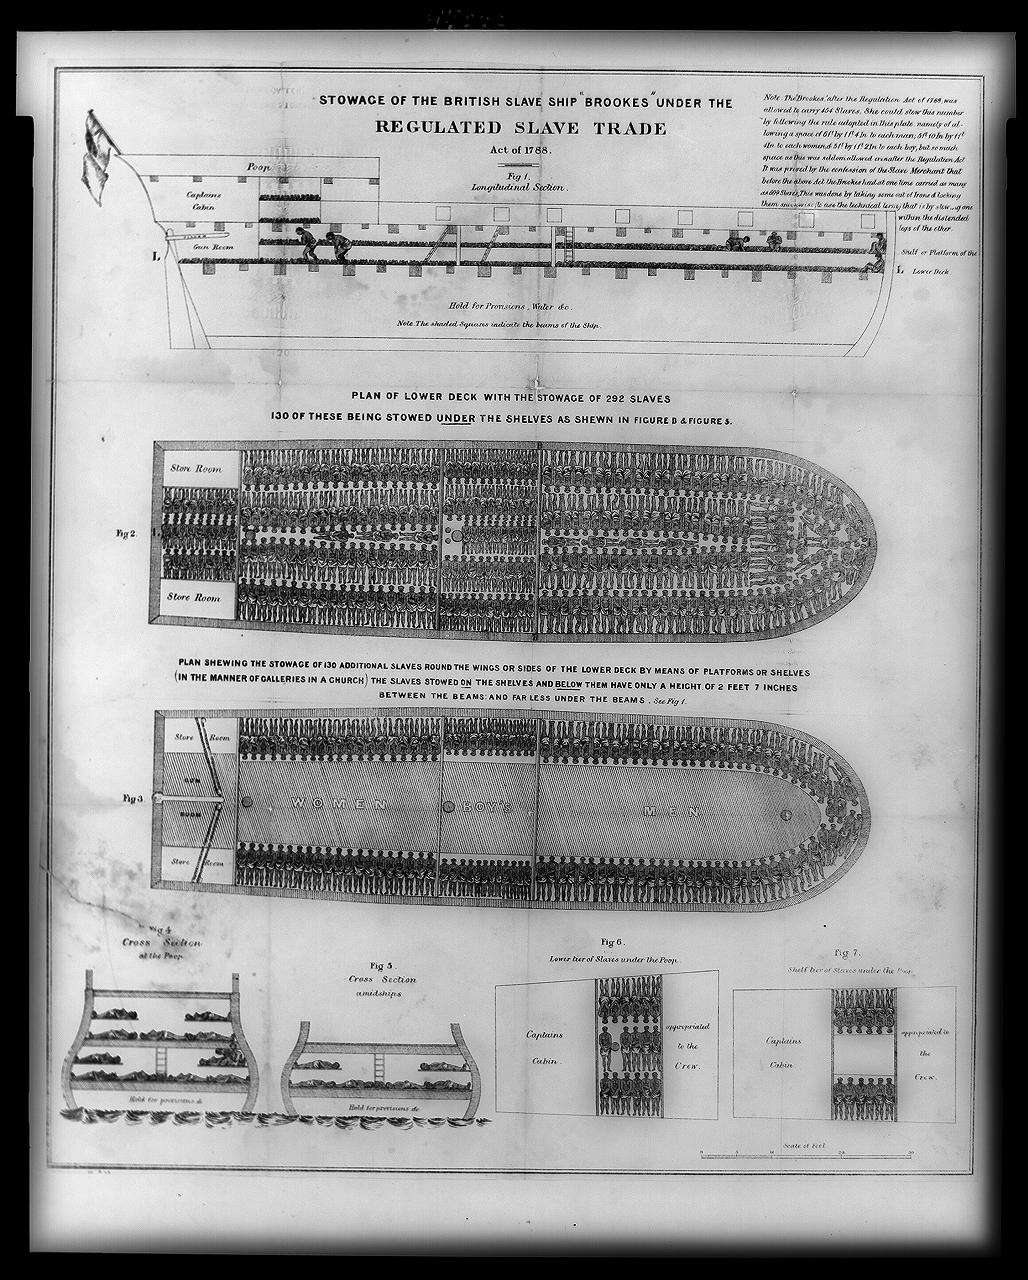 Stowage of the British slave ship